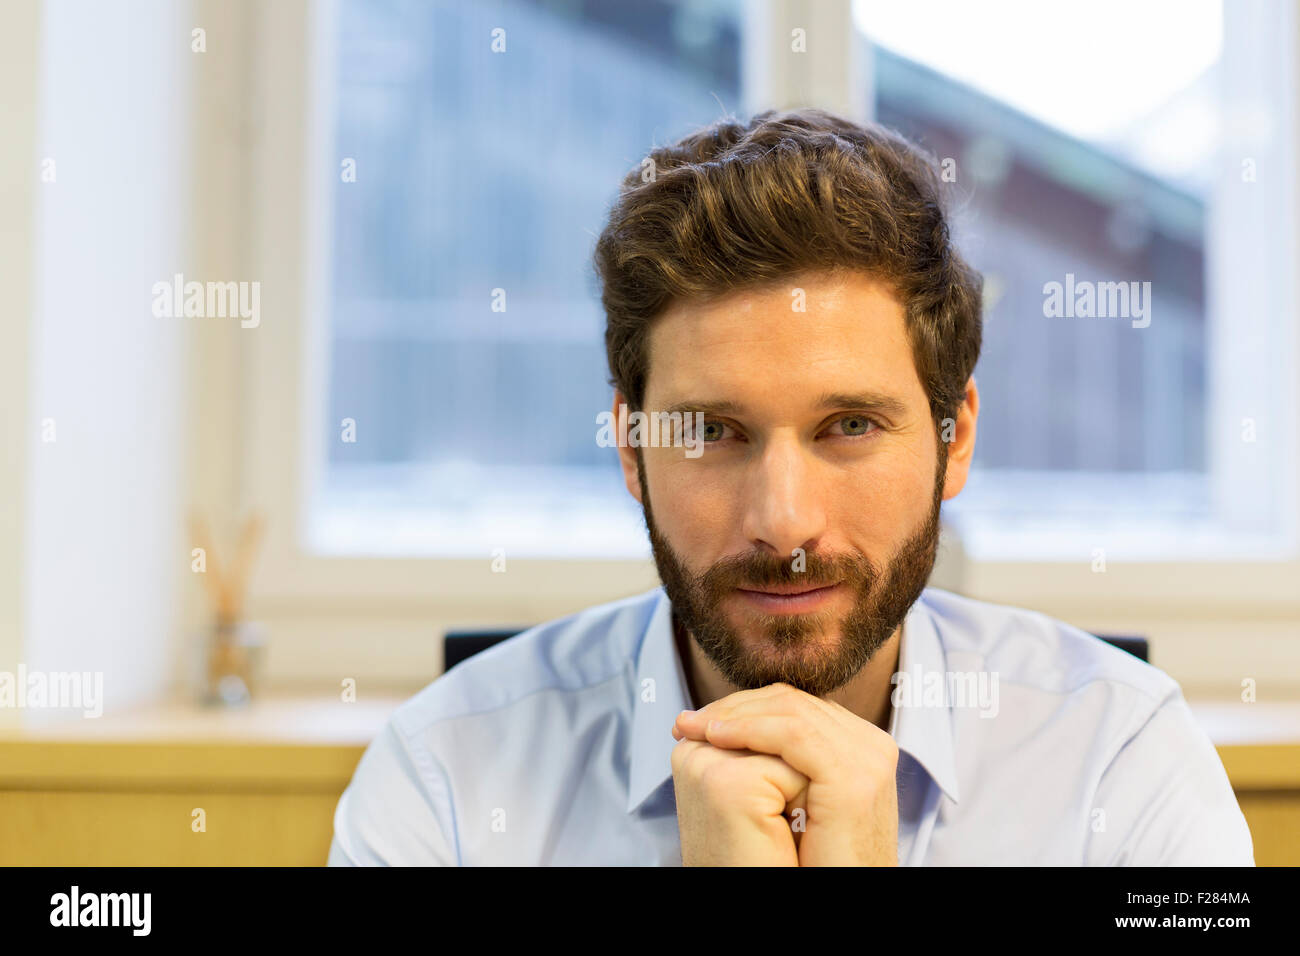 Portrait of confident bearded businessman with hands clasped Stock Photo